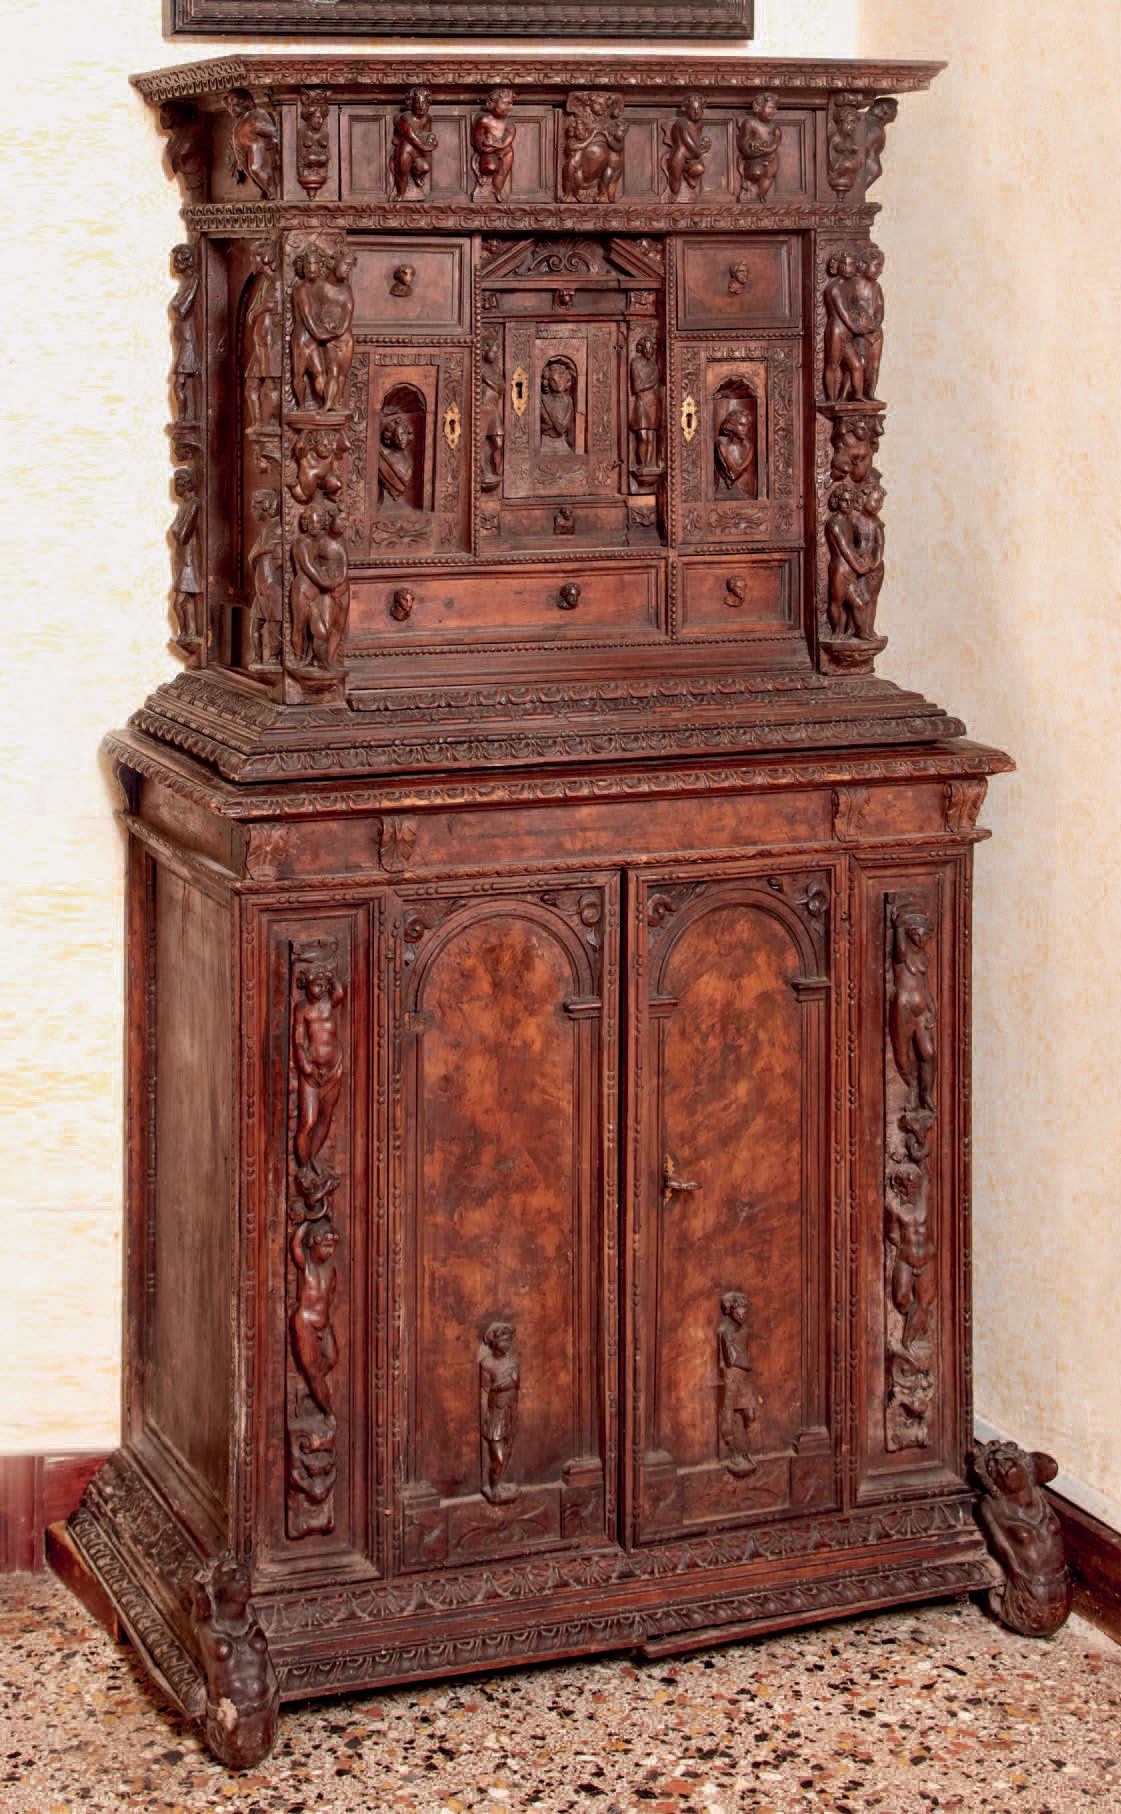 Null Two-body cabinet "a bambocci" in carved walnut and richly carved. Upper bod&hellip;